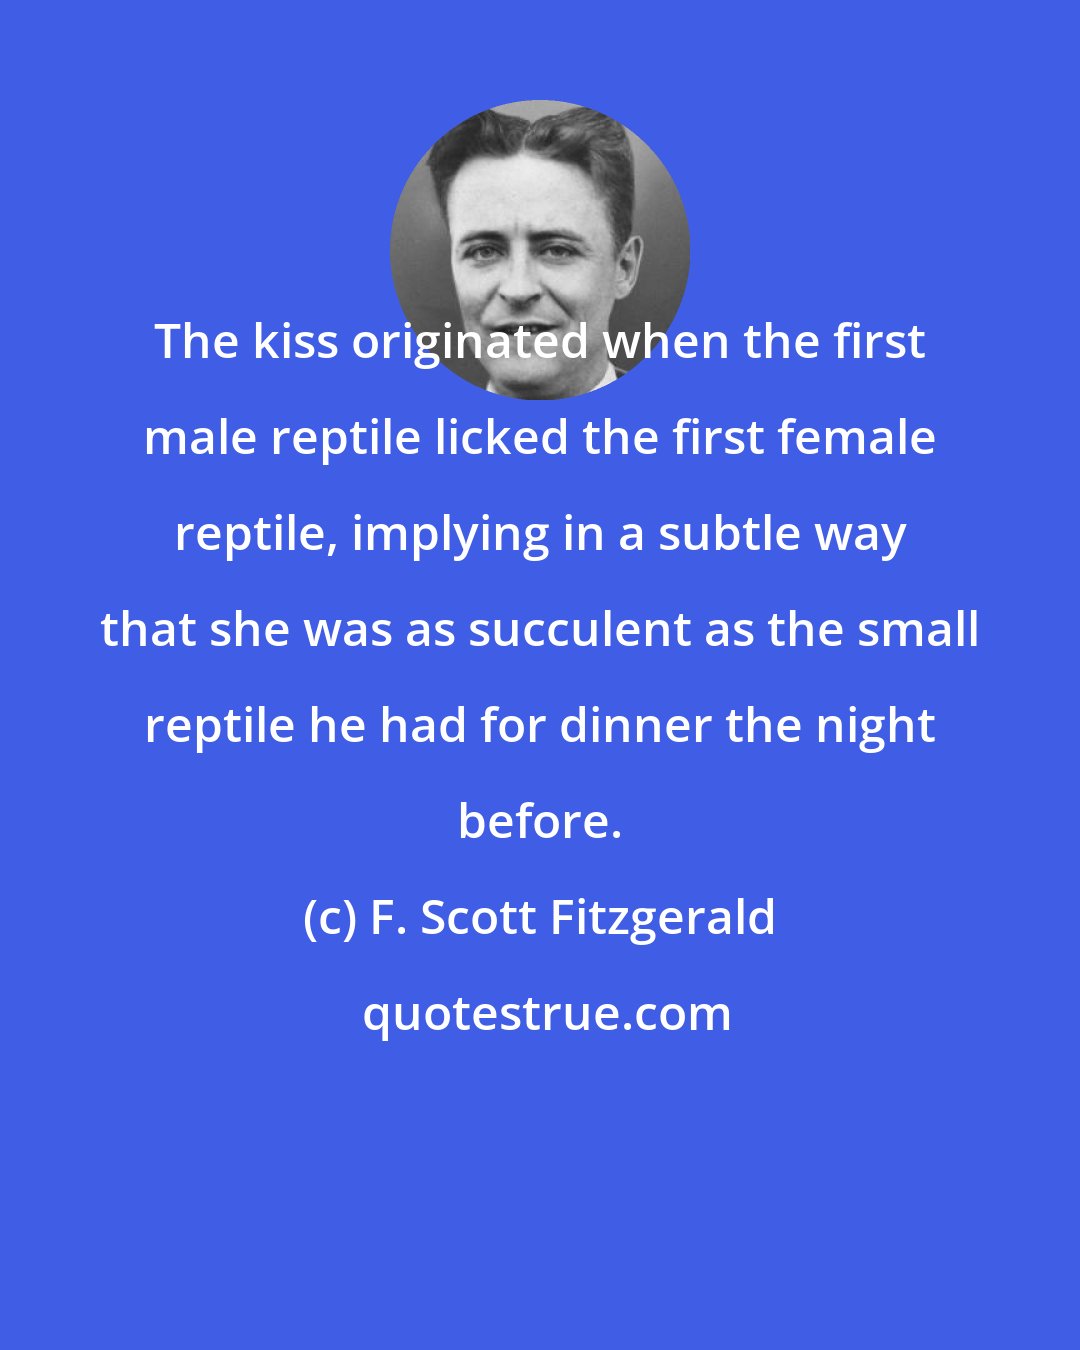 F. Scott Fitzgerald: The kiss originated when the first male reptile licked the first female reptile, implying in a subtle way that she was as succulent as the small reptile he had for dinner the night before.